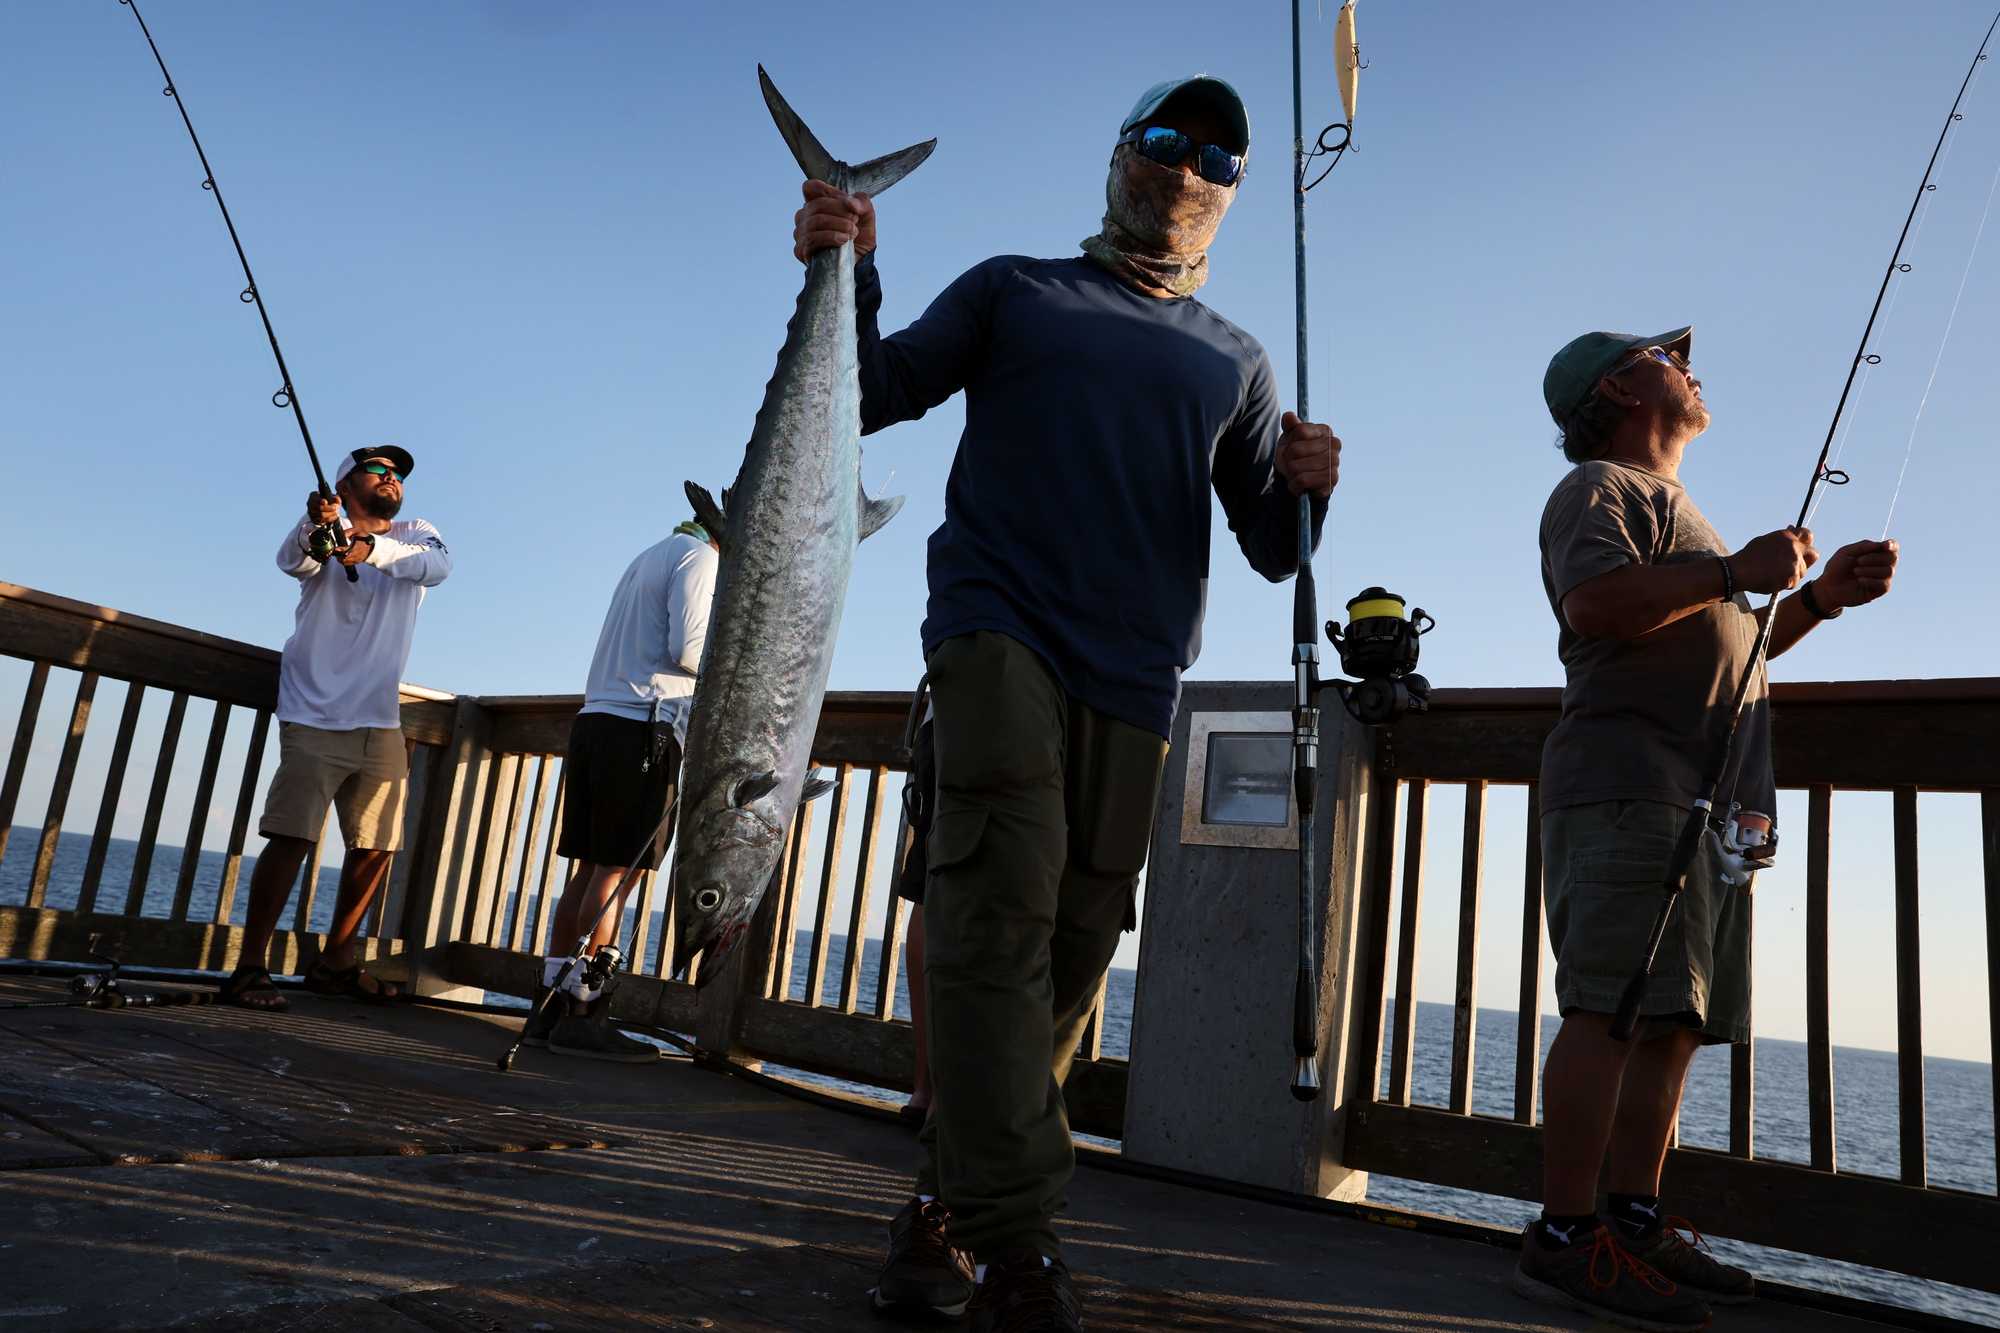 Dat Phan carried the king mackerel he caught while fishing off the city pier in Panama City Beach.